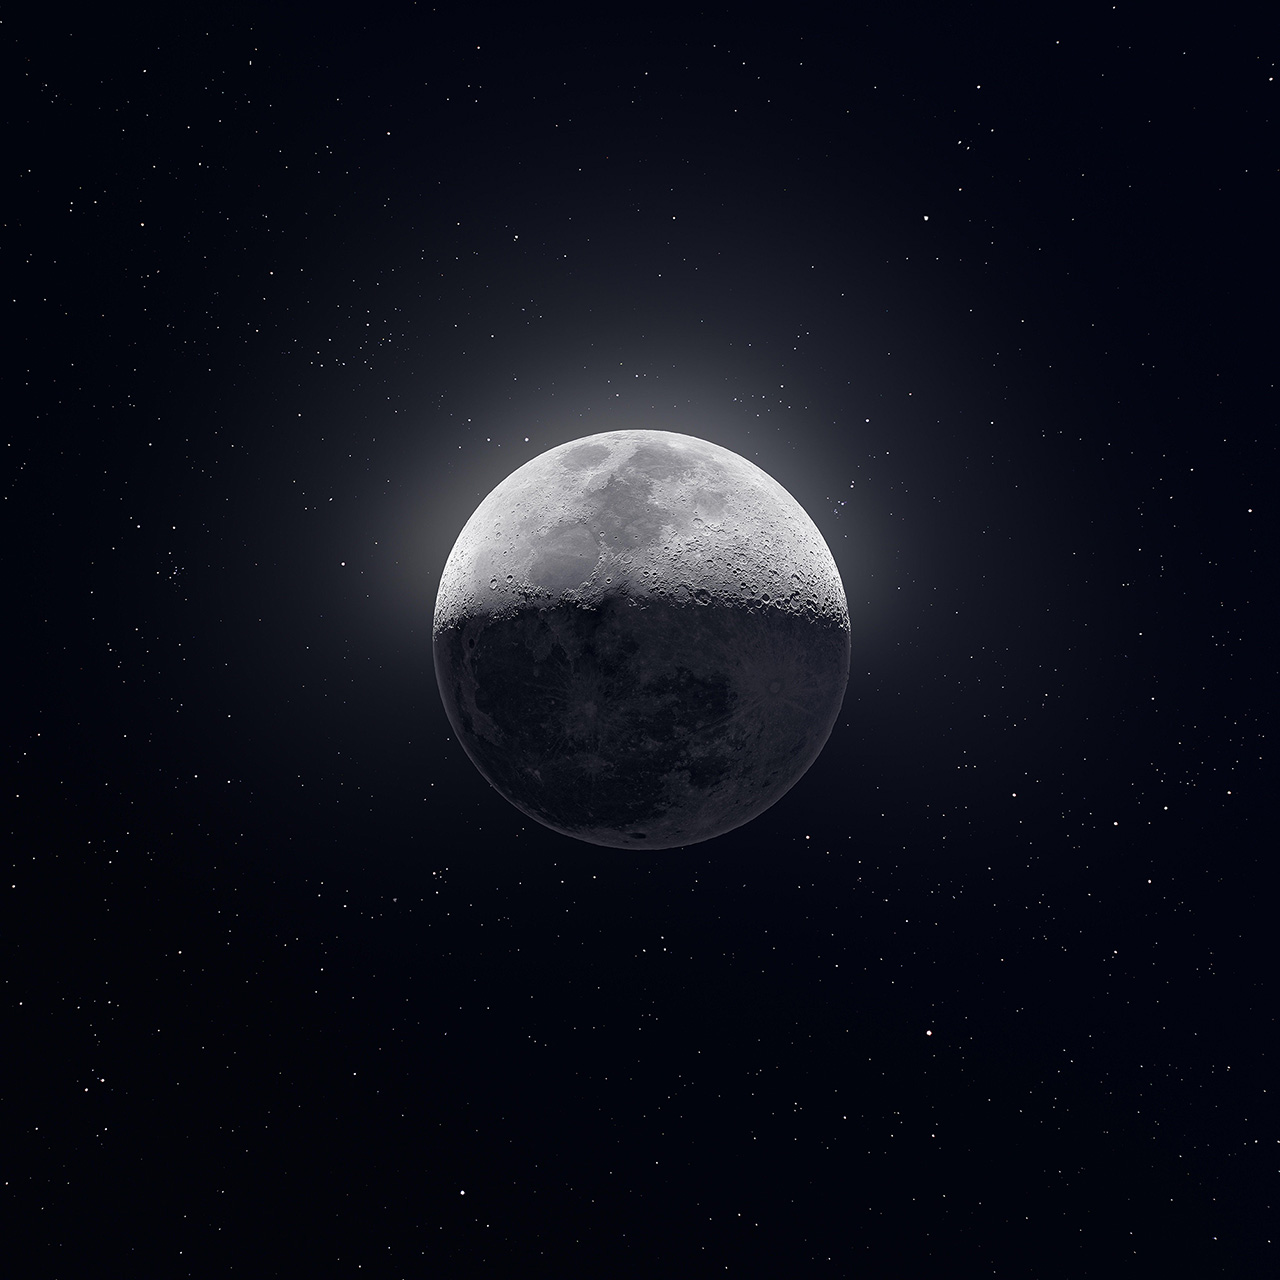 https://in-space.ru/wp-content/uploads/2019/07/moon-black-and-white-stars-galaxy.jpg